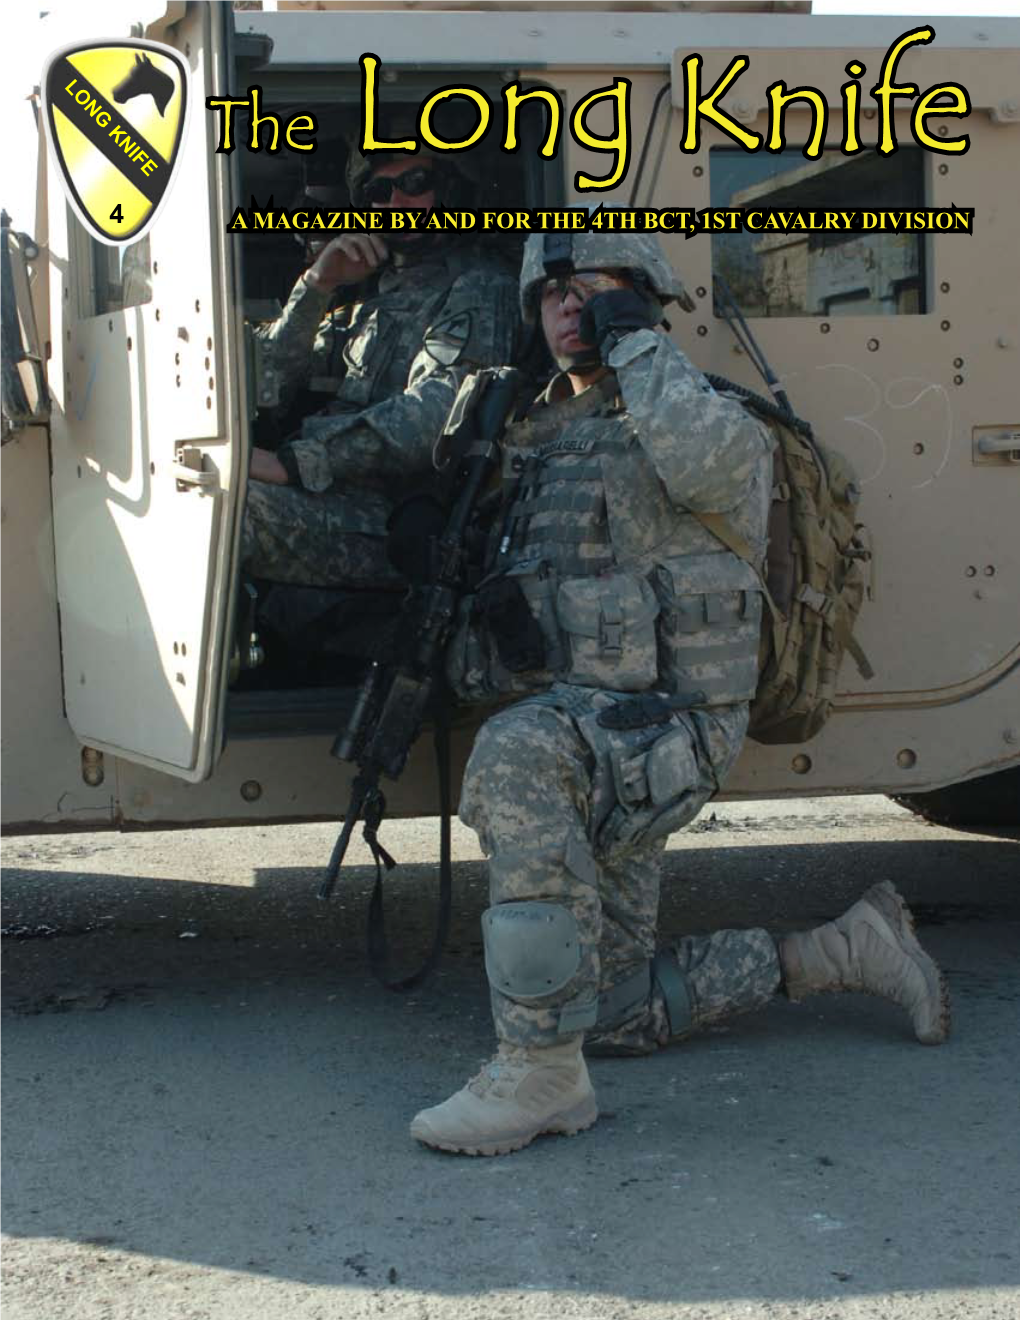 A MAGAZINE by and for the 4TH BCT, 1ST CAVALRY DIVISION the Long Knife